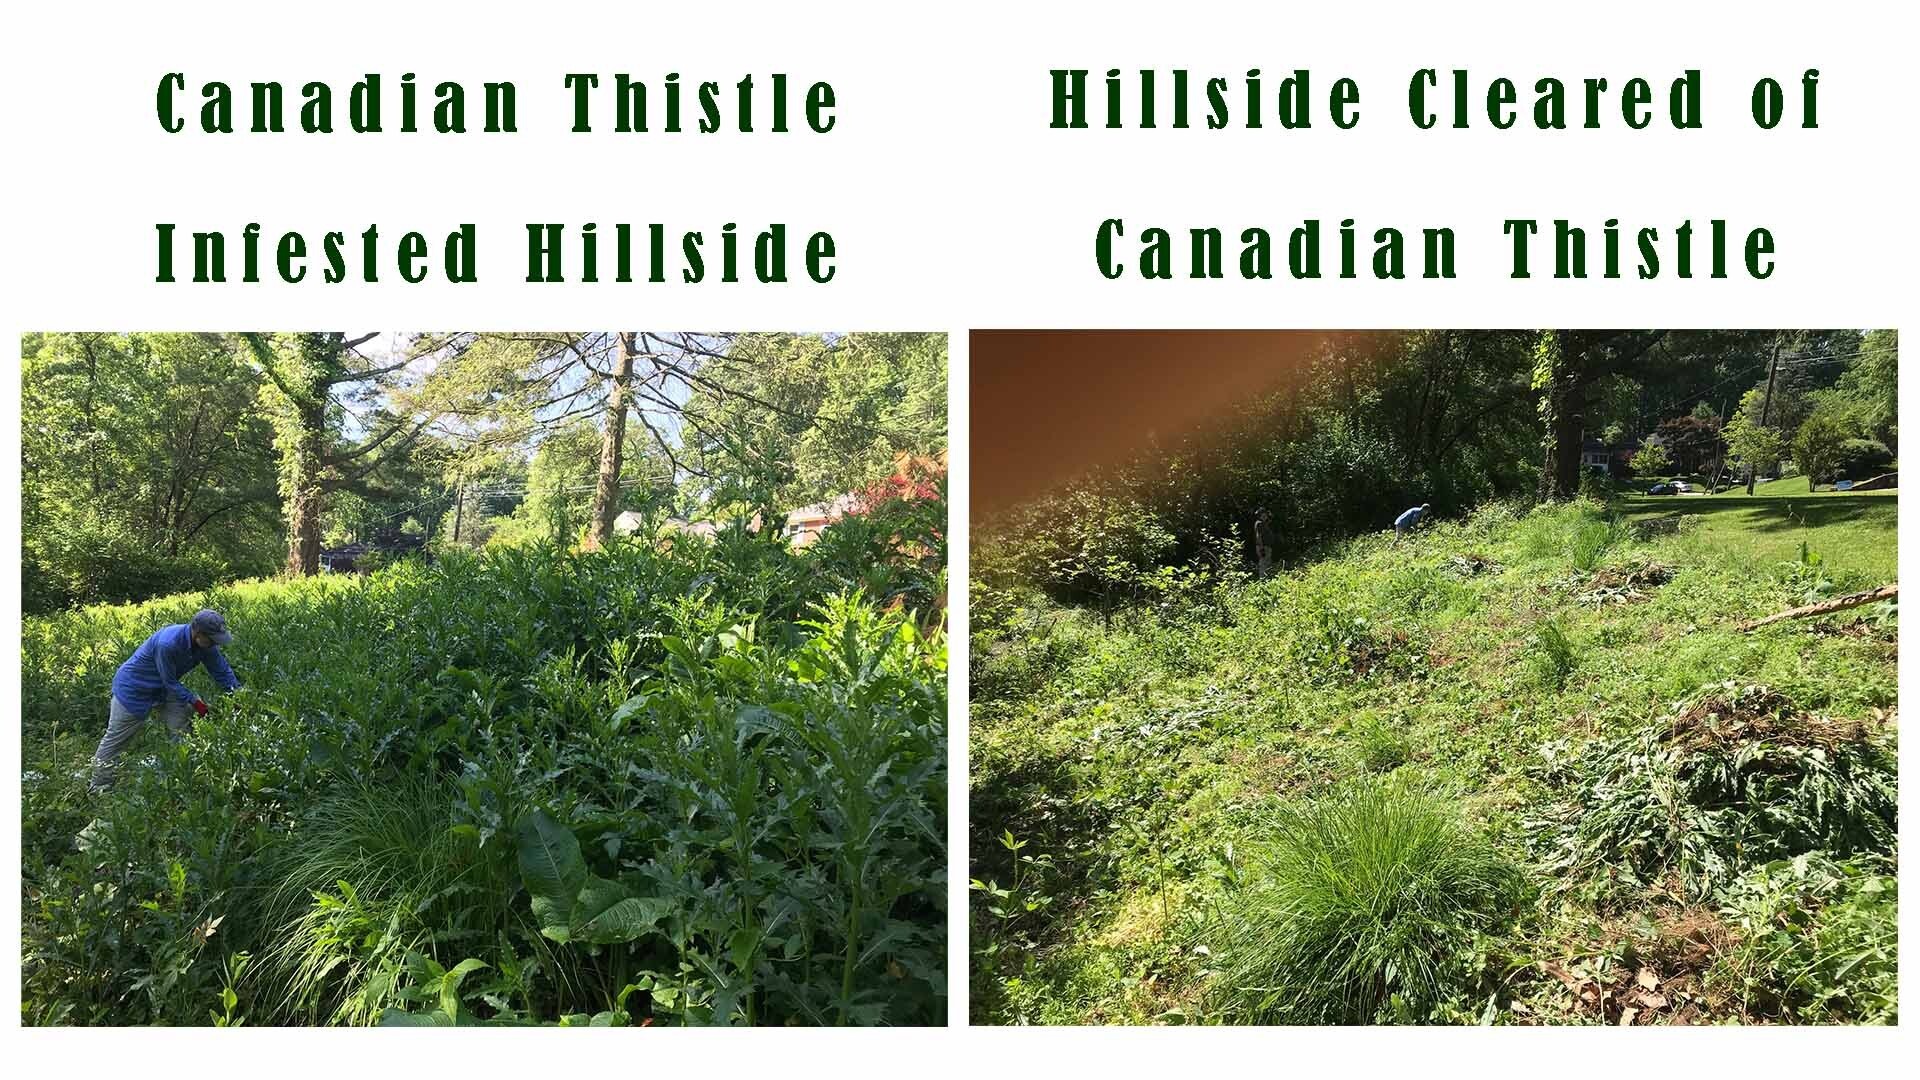 Two FOSC stewards/weed warriors clear this large hillside in Sligo at Crosby Rd of invasive Canadian thistle, as shown in this before and after photo.